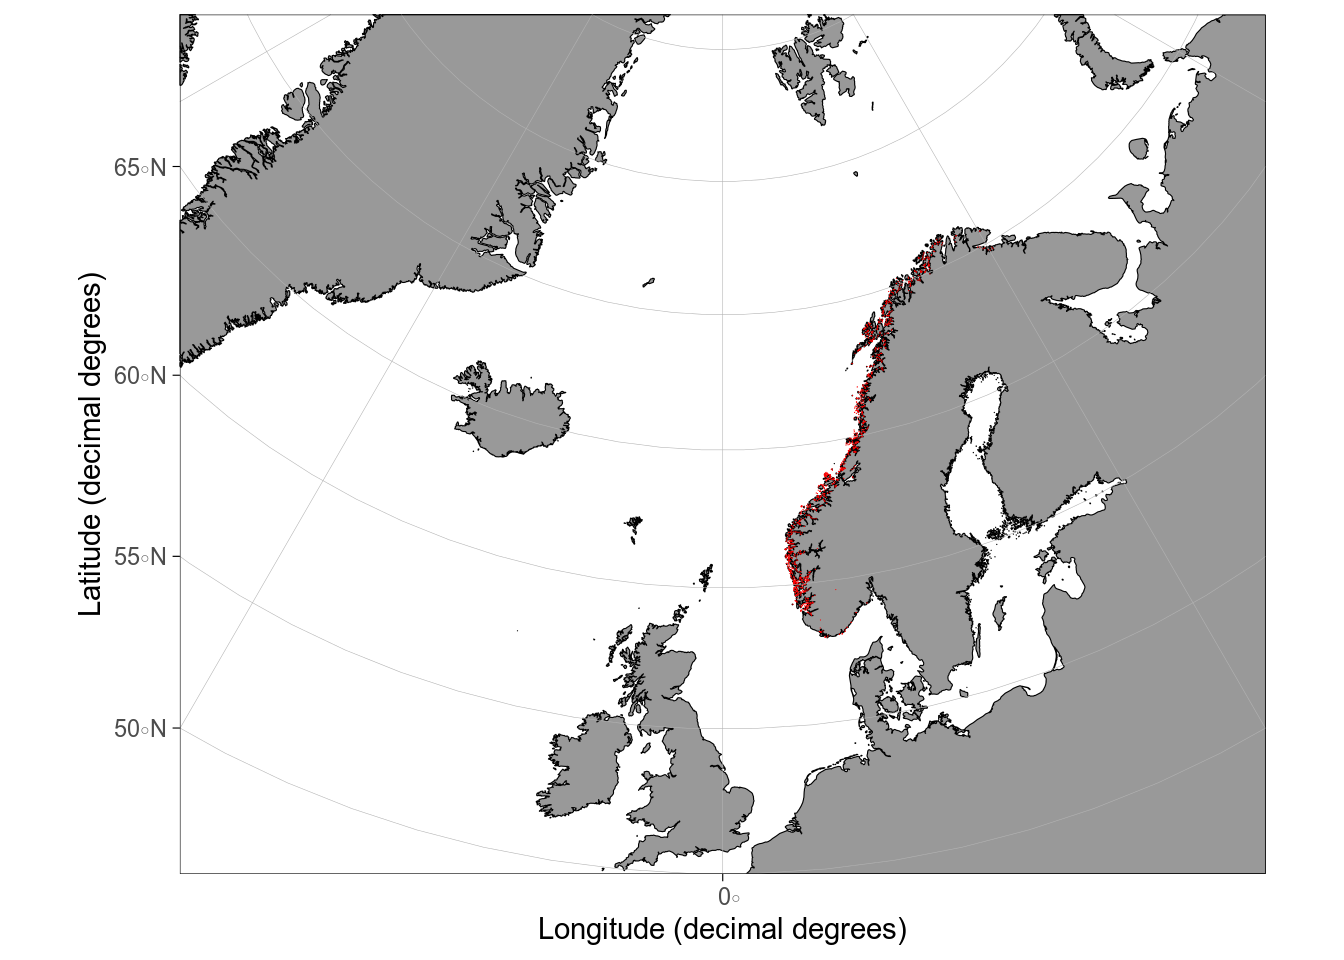 maps of aquaculture sites in Norway plotted with different packages